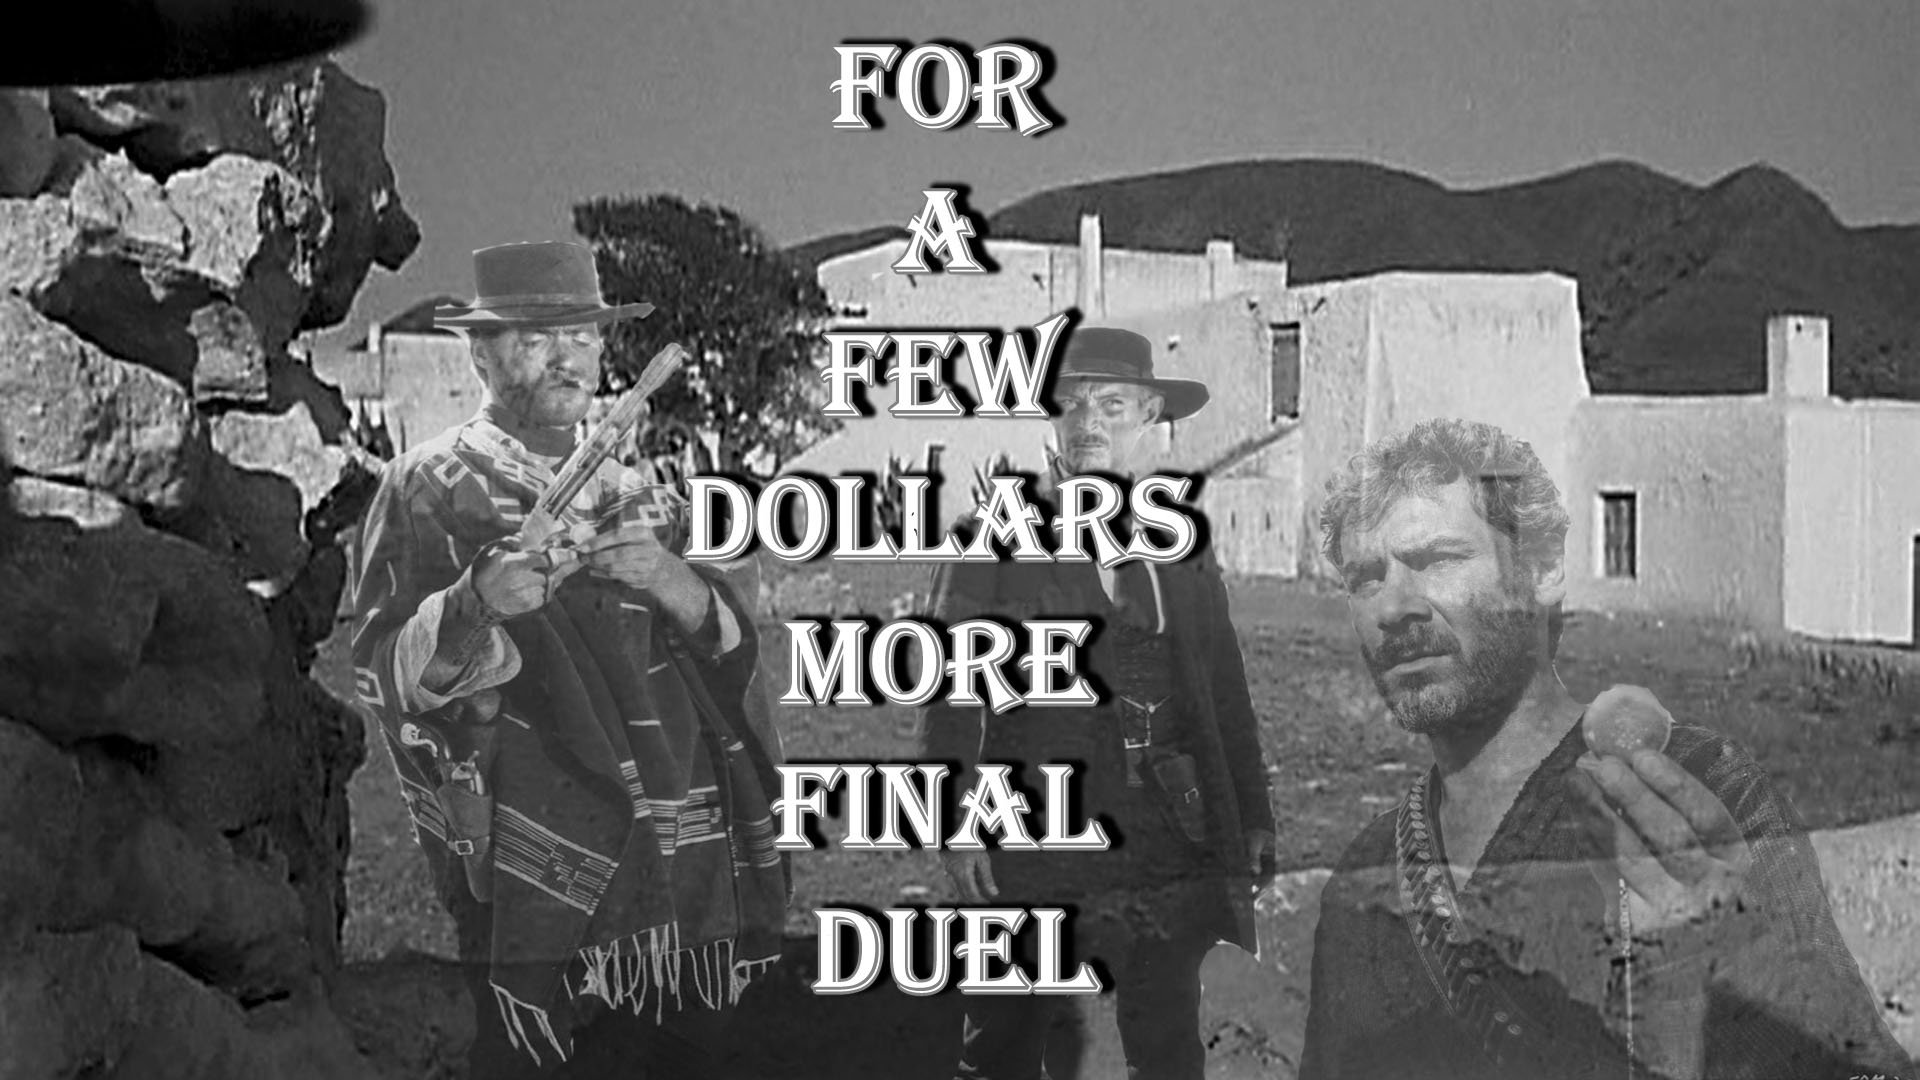 Дуэль финал. Ennio Morricone for a few Dollars more. For a few Dollars more - Final Duel (1965. Cover Ennio Morricone - Sergio Leone - Greatest Western Themes of all time (2018). 20 - E.Morricone - for a few Dollars more.mp3.